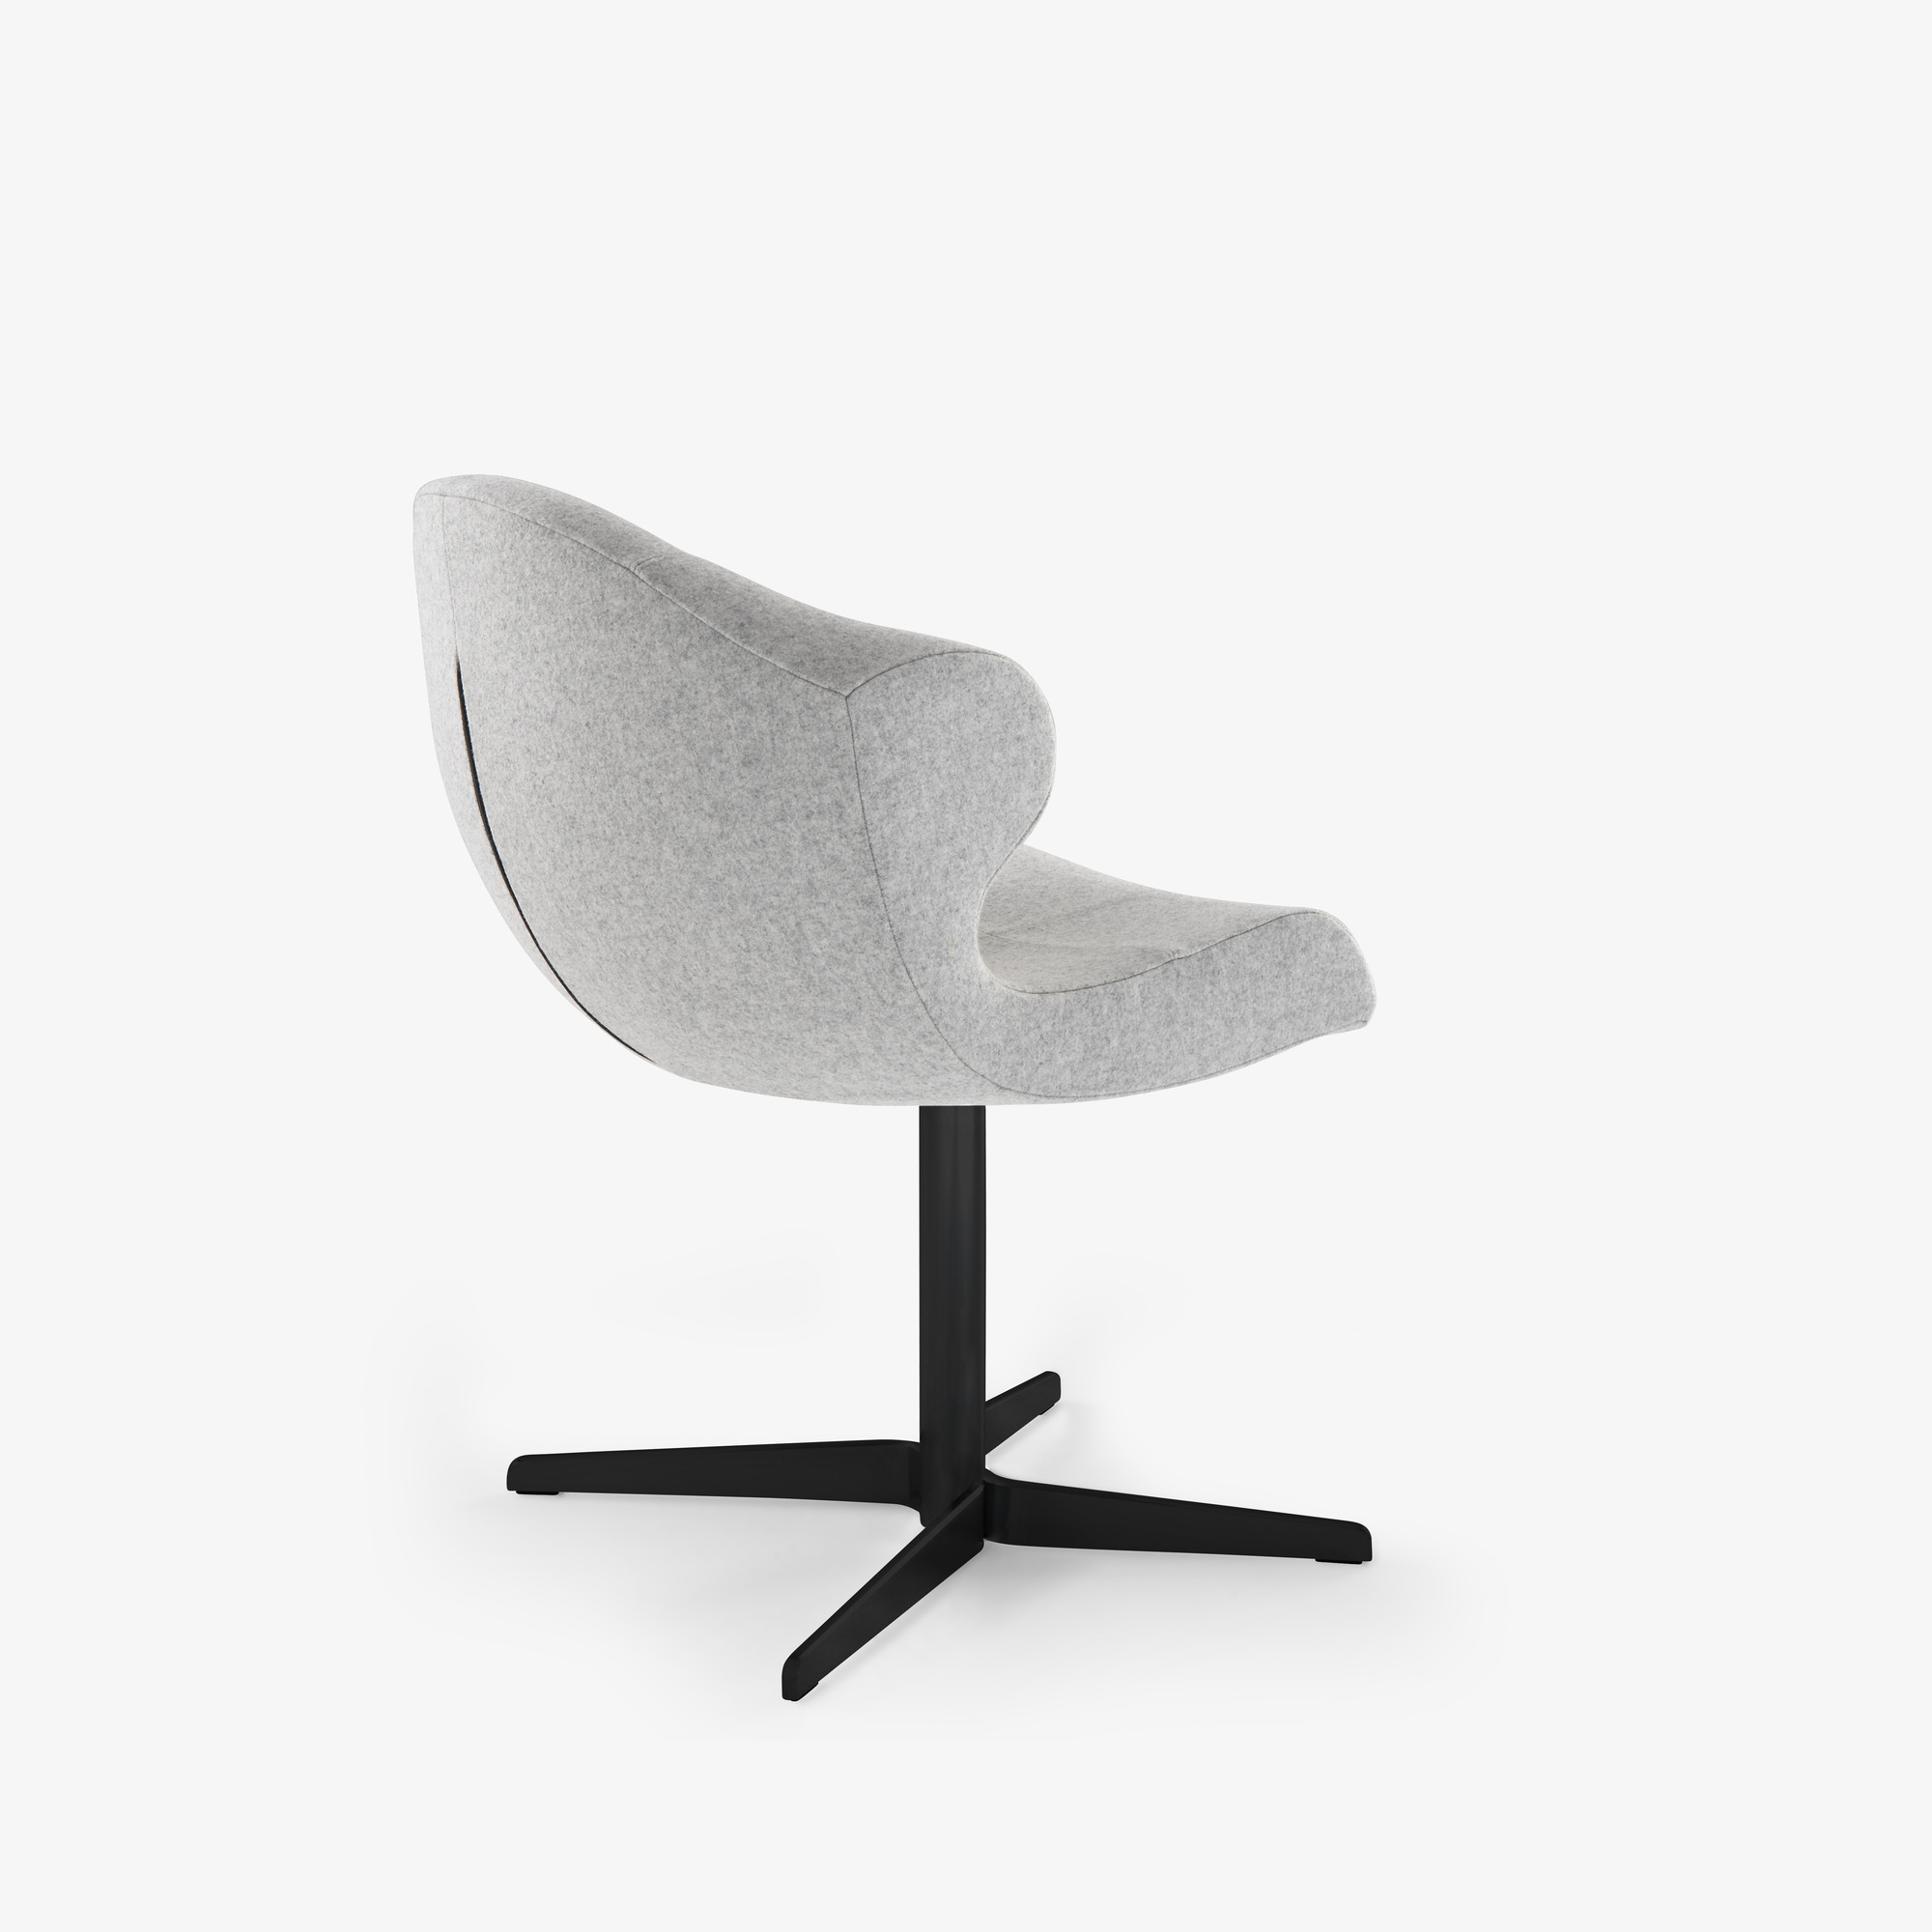 Image Alster chair with arms matt black central pedestal 4